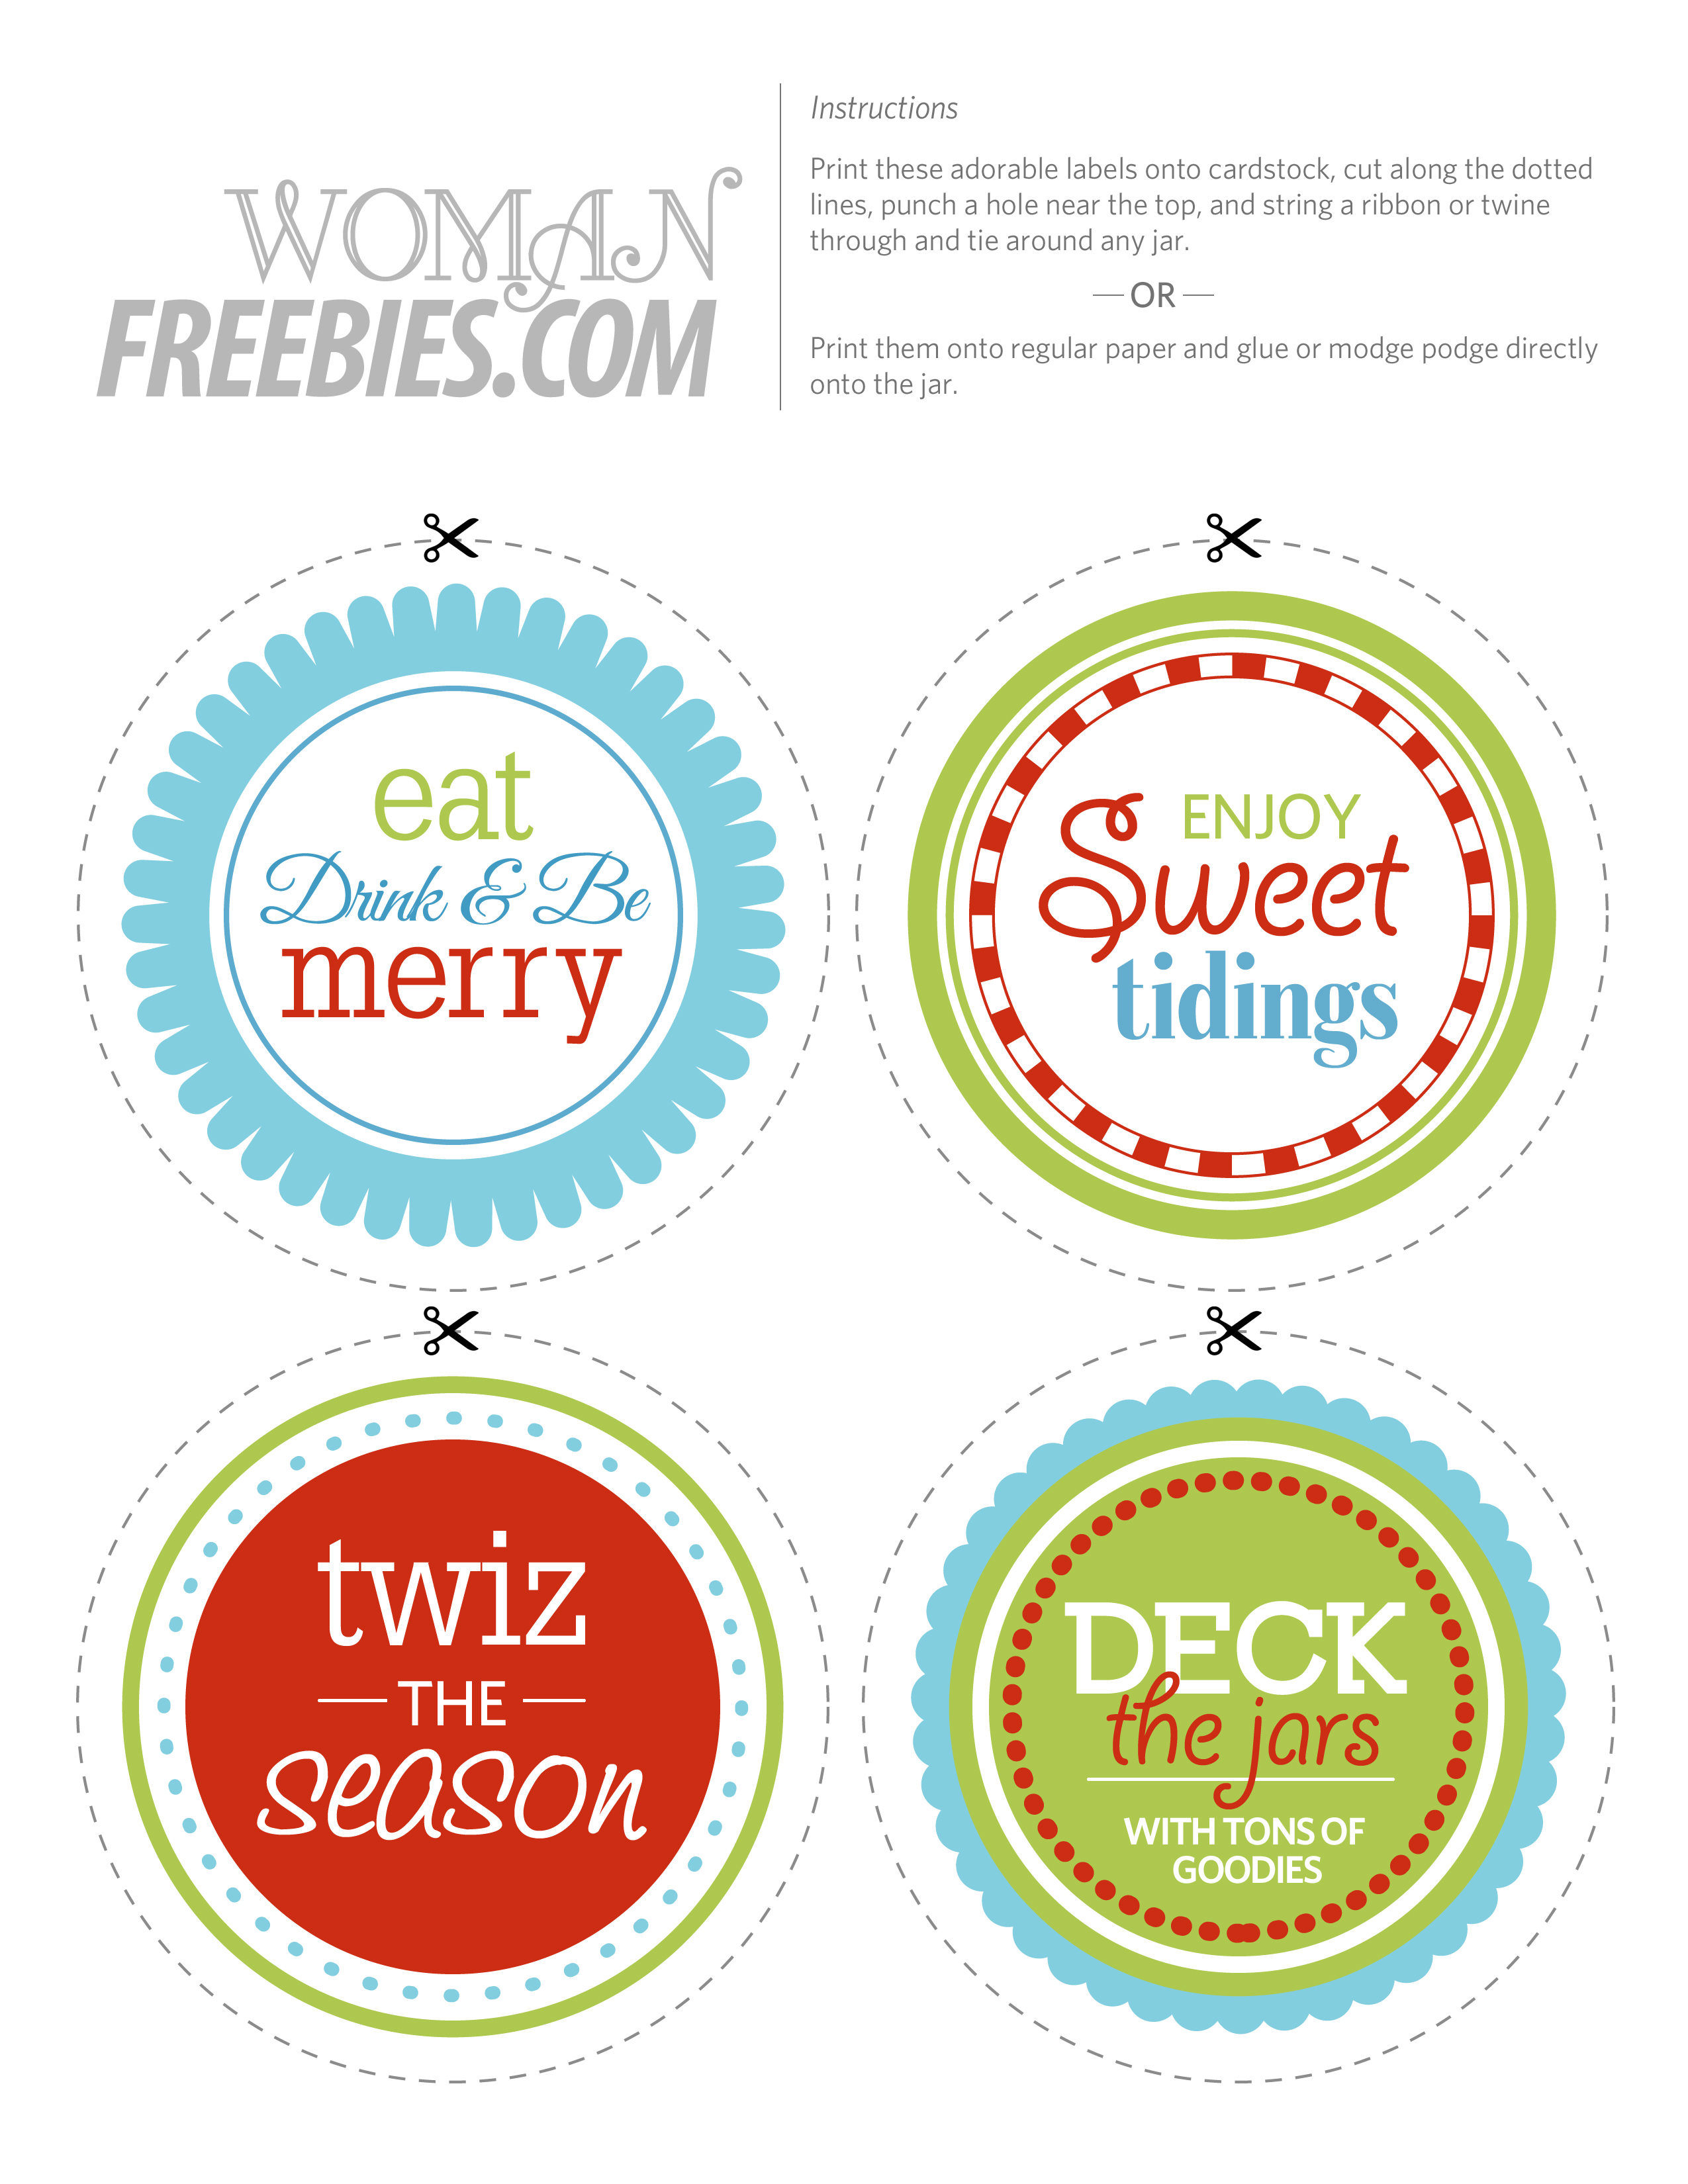 6 Best Images of Free Printable Candy Stickers Free Printable Candy